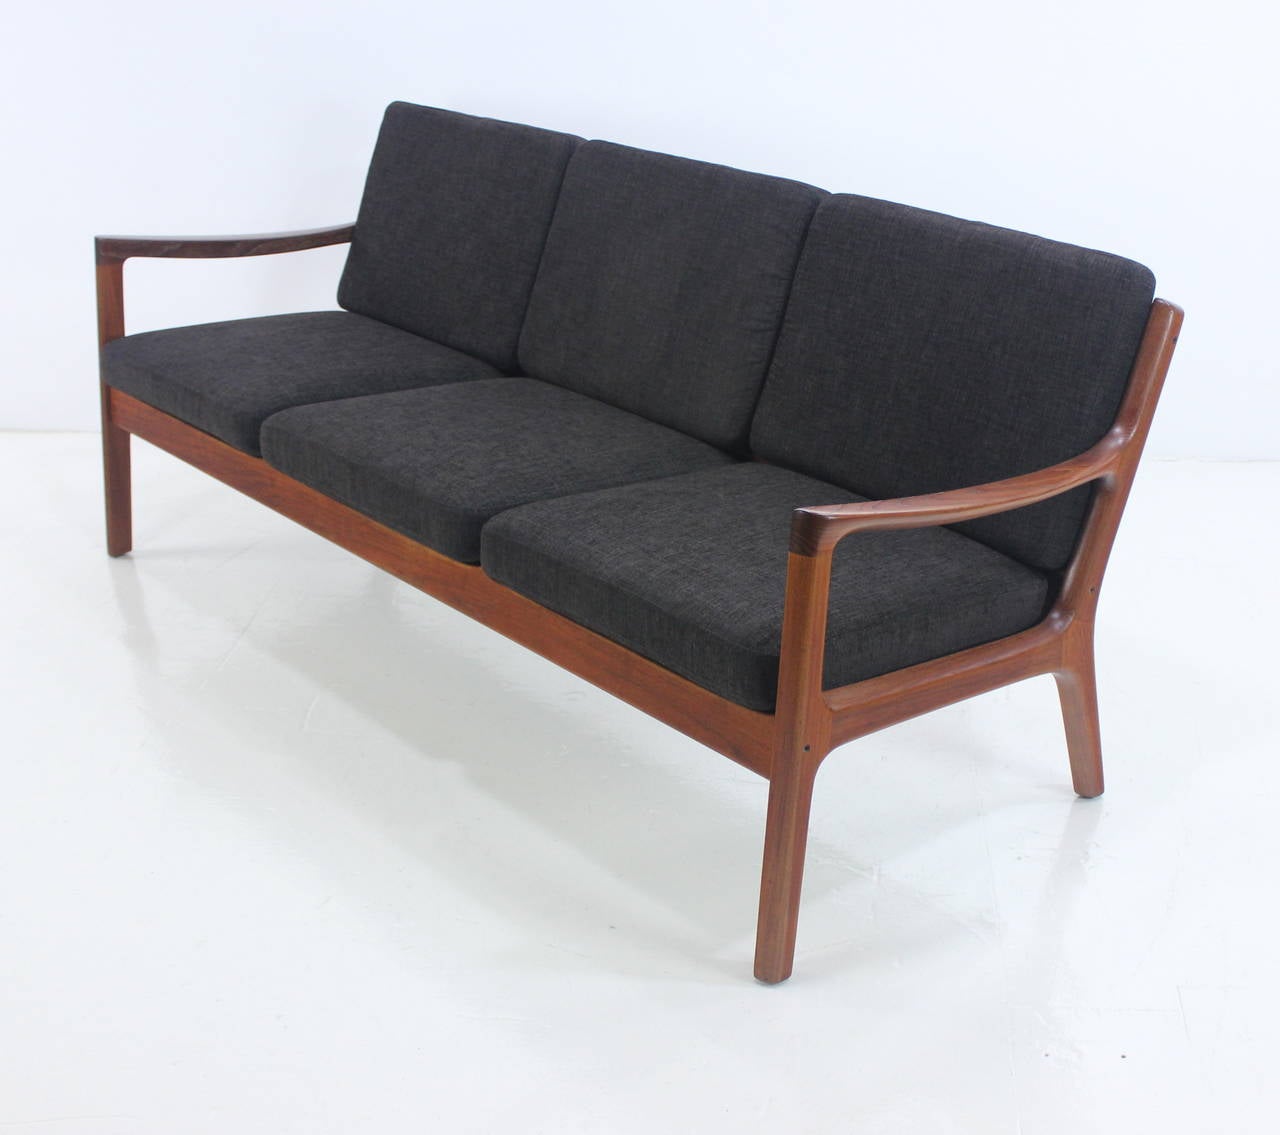 Danish modern sofa designed by Ole Wanscher.
Richly grained sculptural teak frame with exceptional joinery.
Extraordinary profile from every angle with dazzling back view.
Newly upholstered in highest quality burnished brown period